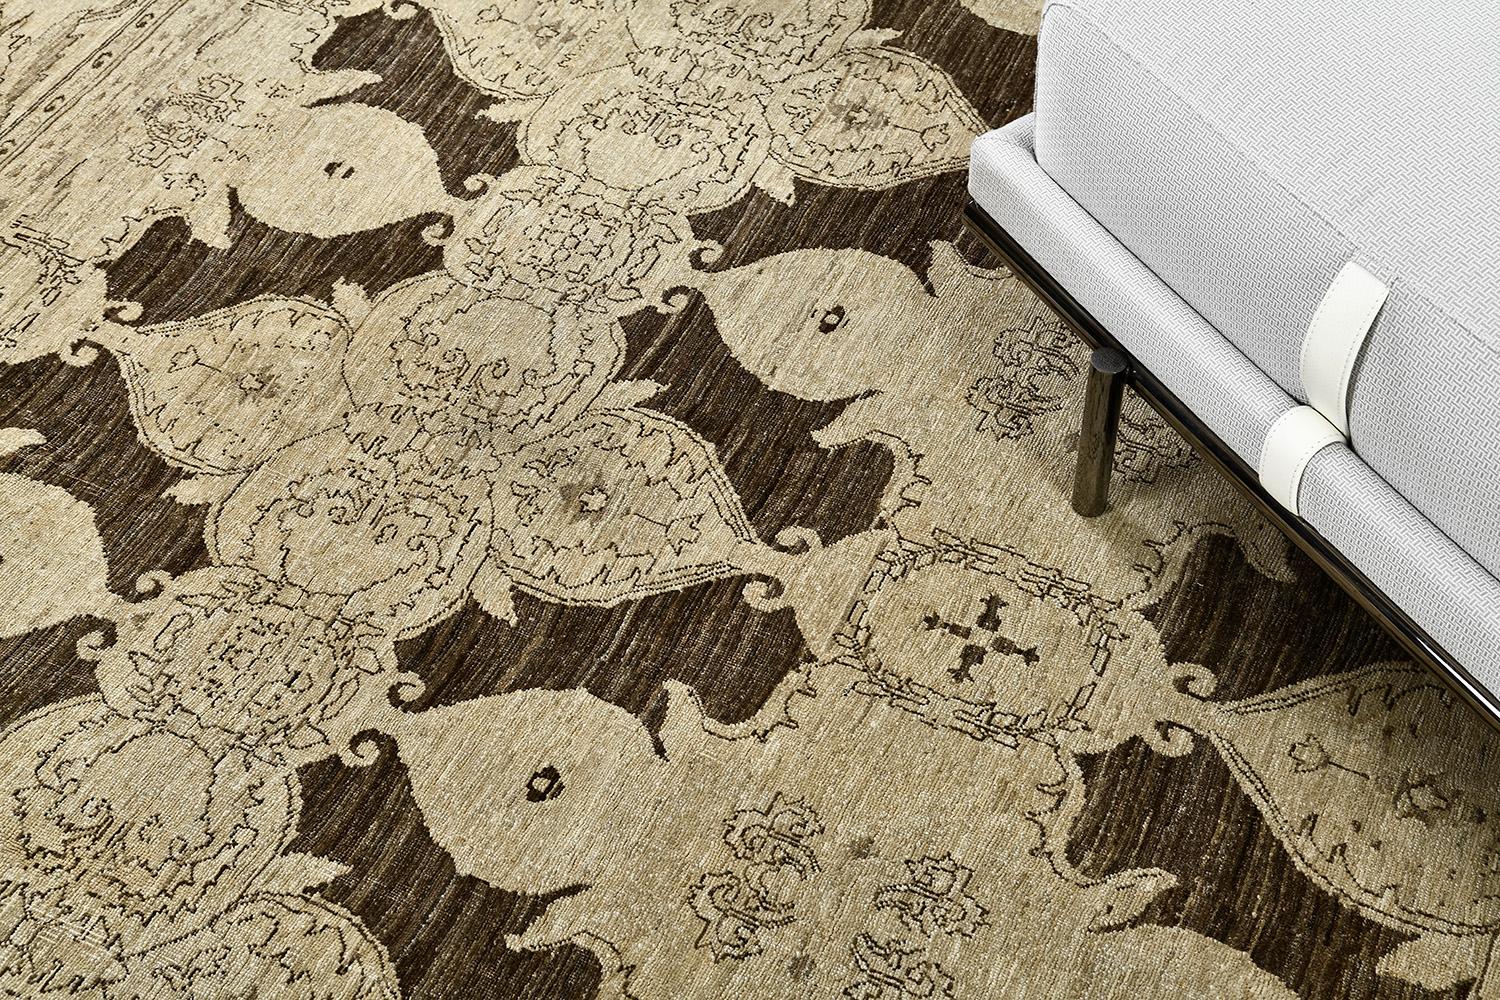 Known for the captivating floral design of this Vintage Style Arts and Crafts Design revival creation, this rug that was gracefully made from high quality hand spun wool that features all over botanical pattern composed of blooming palmettes, curved